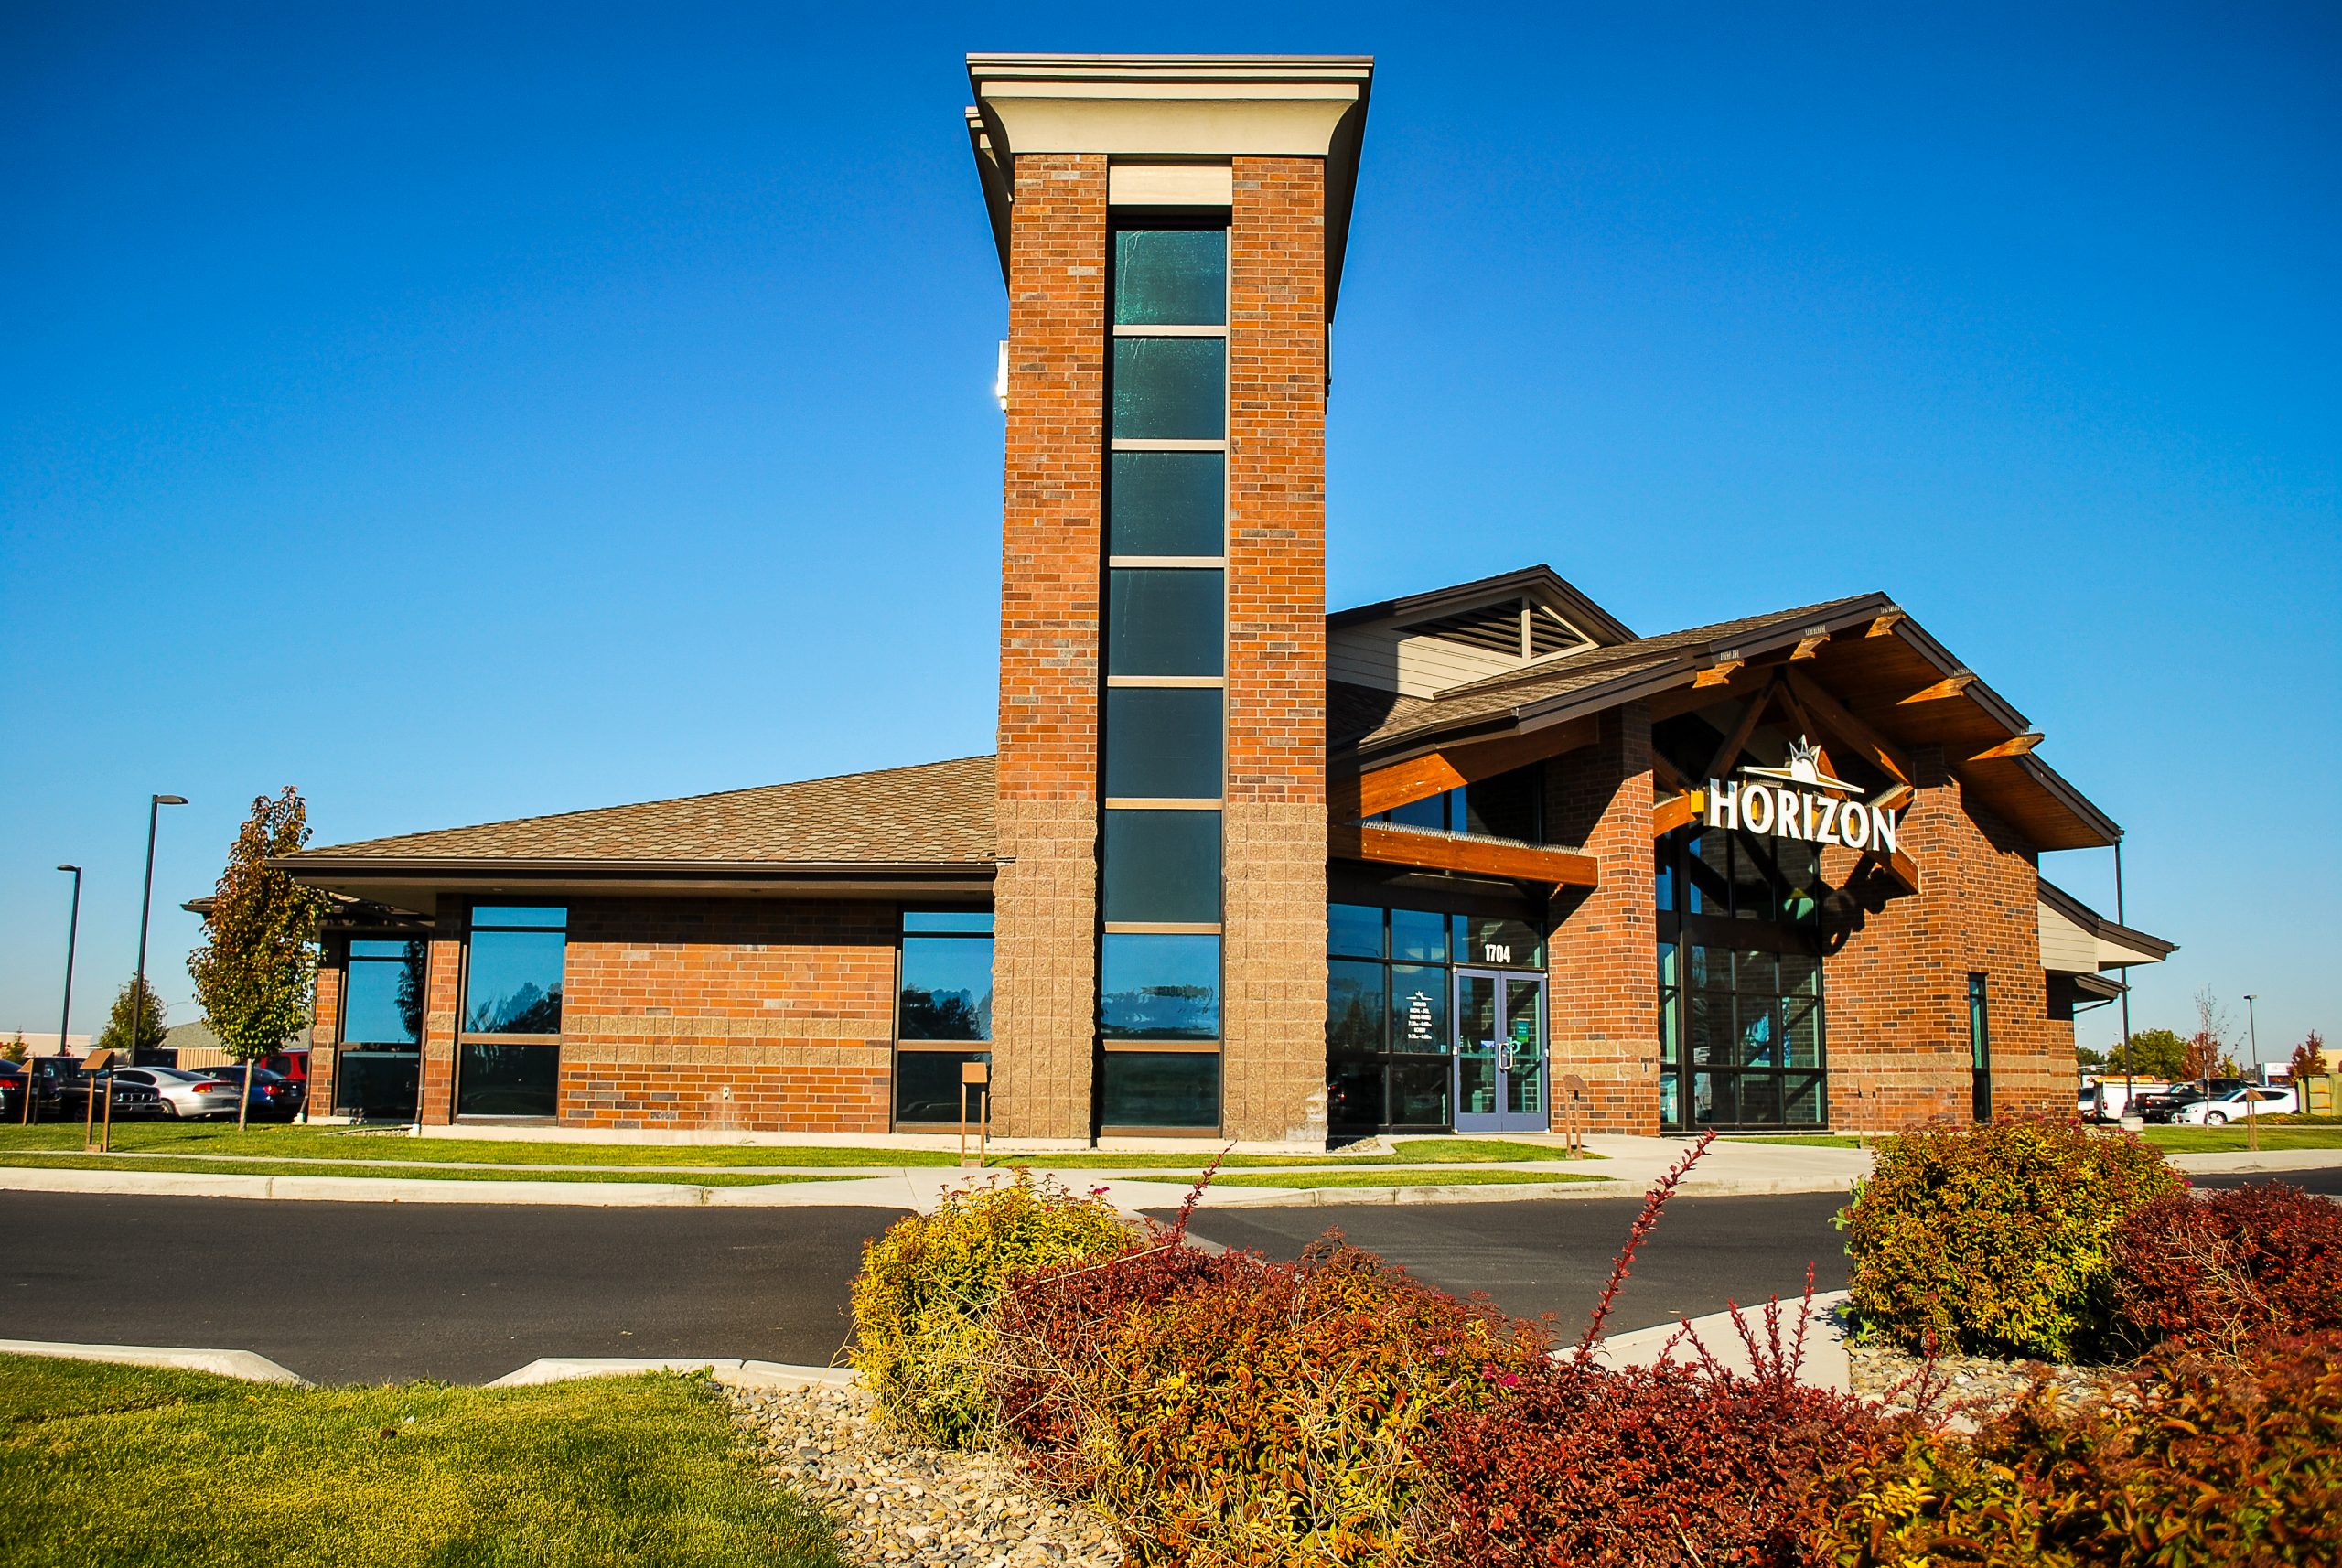 A new building for the Moses Lake, Washington branch of Horizon Credit Union the features an iconic tower element, exposed timber roof structure, and skylights.